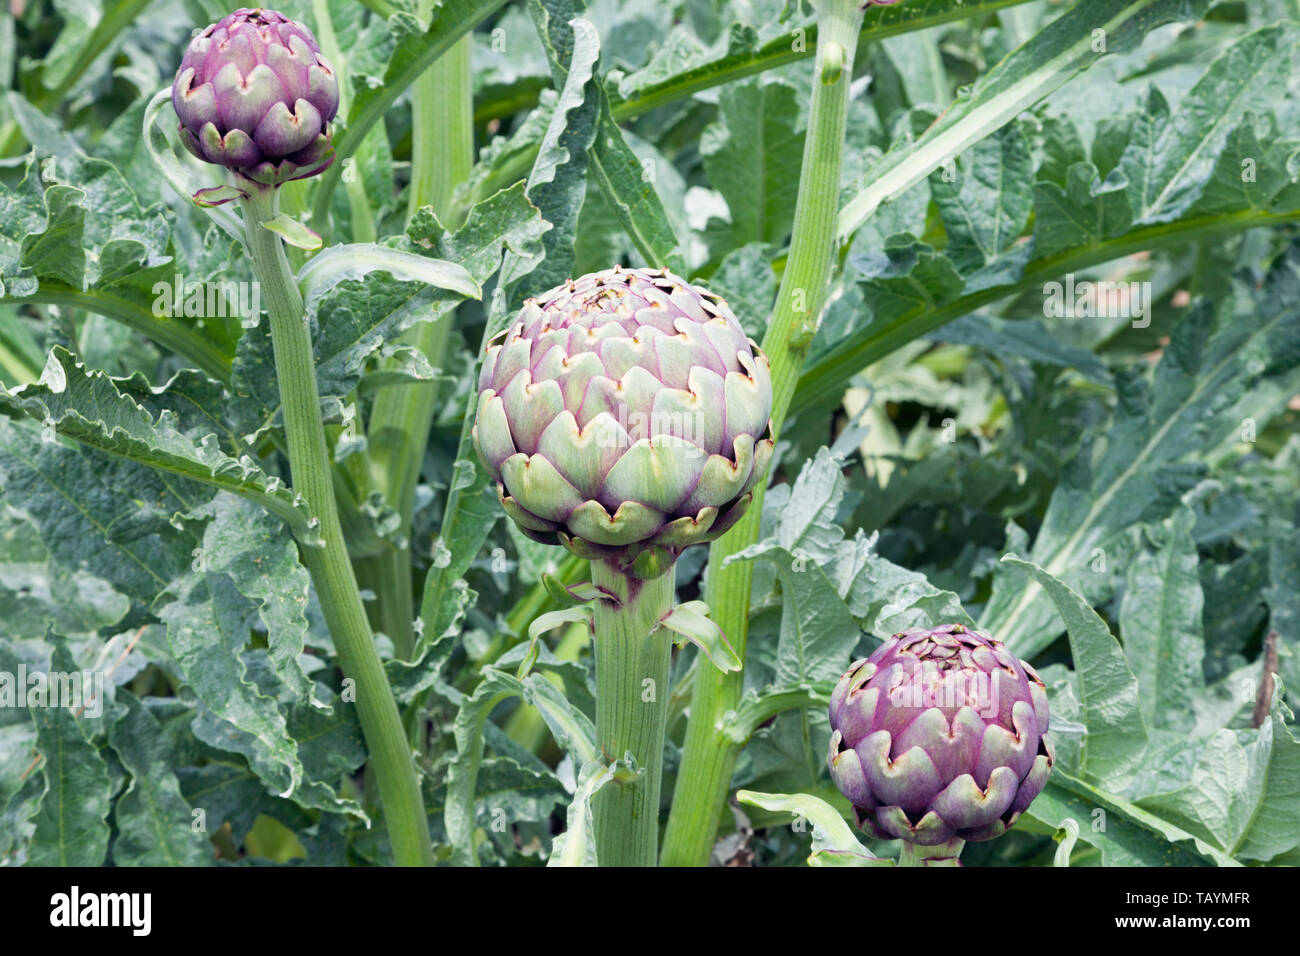 Globe artichokes in a vegetable garden, with purple flowers, green lush foliage . Stock Photo